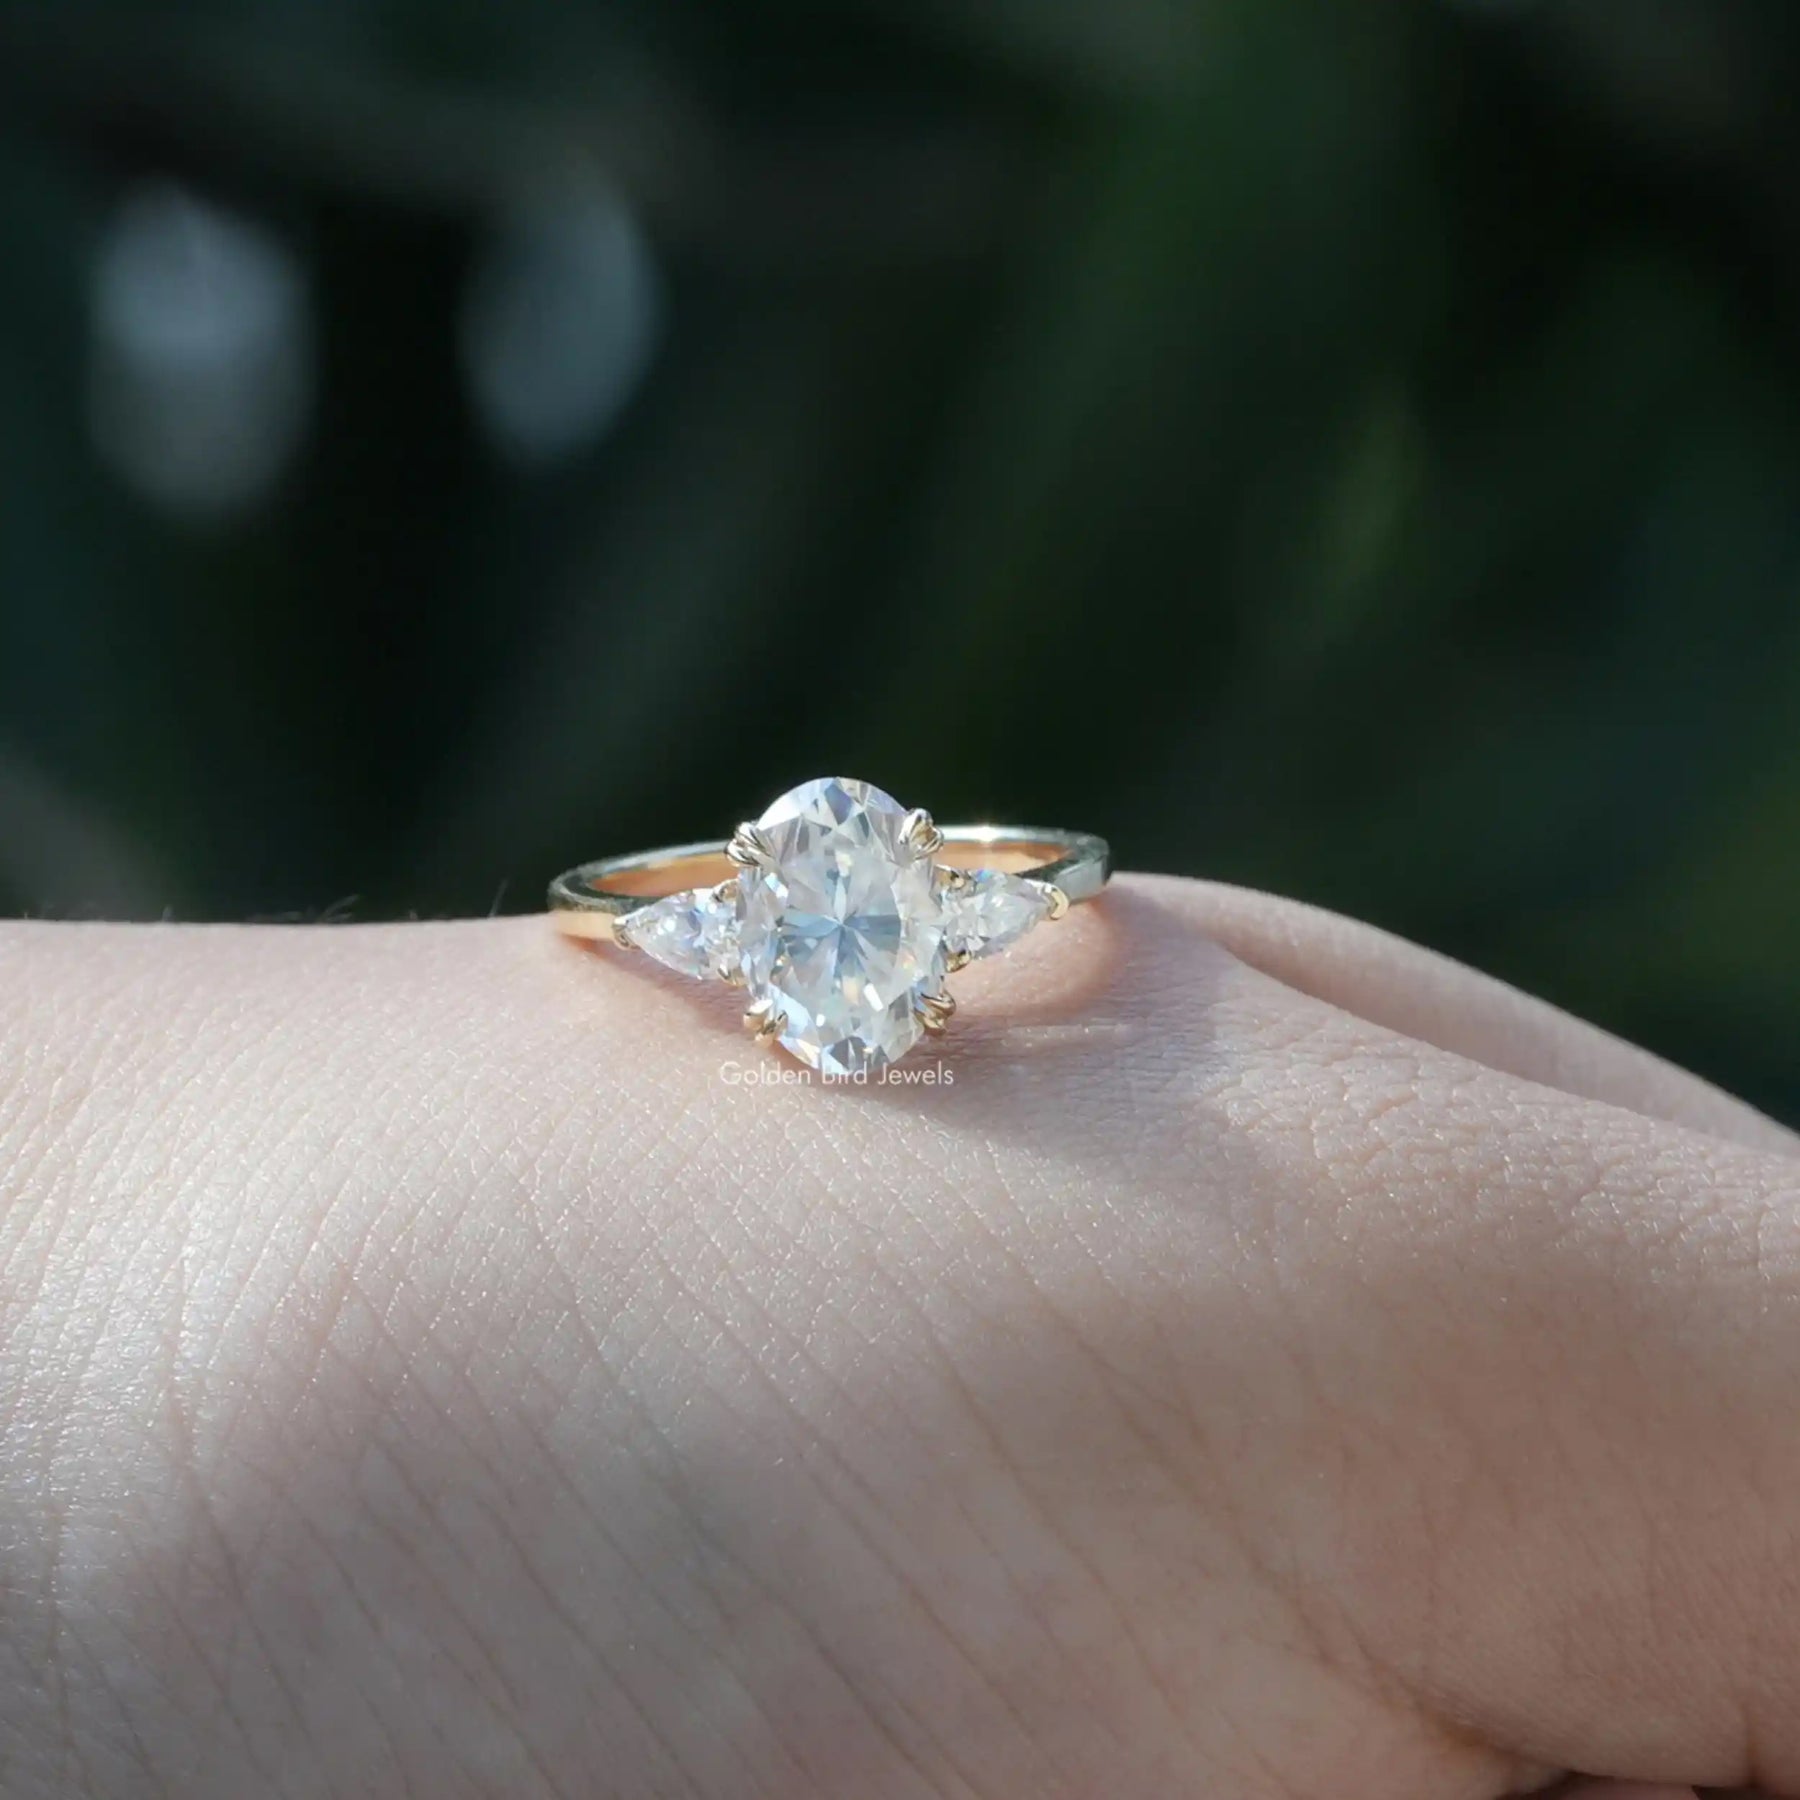 [Moissanite Three Stone Oval And Pear Cut Engagement Ring]-[Golden Bird Jewels]